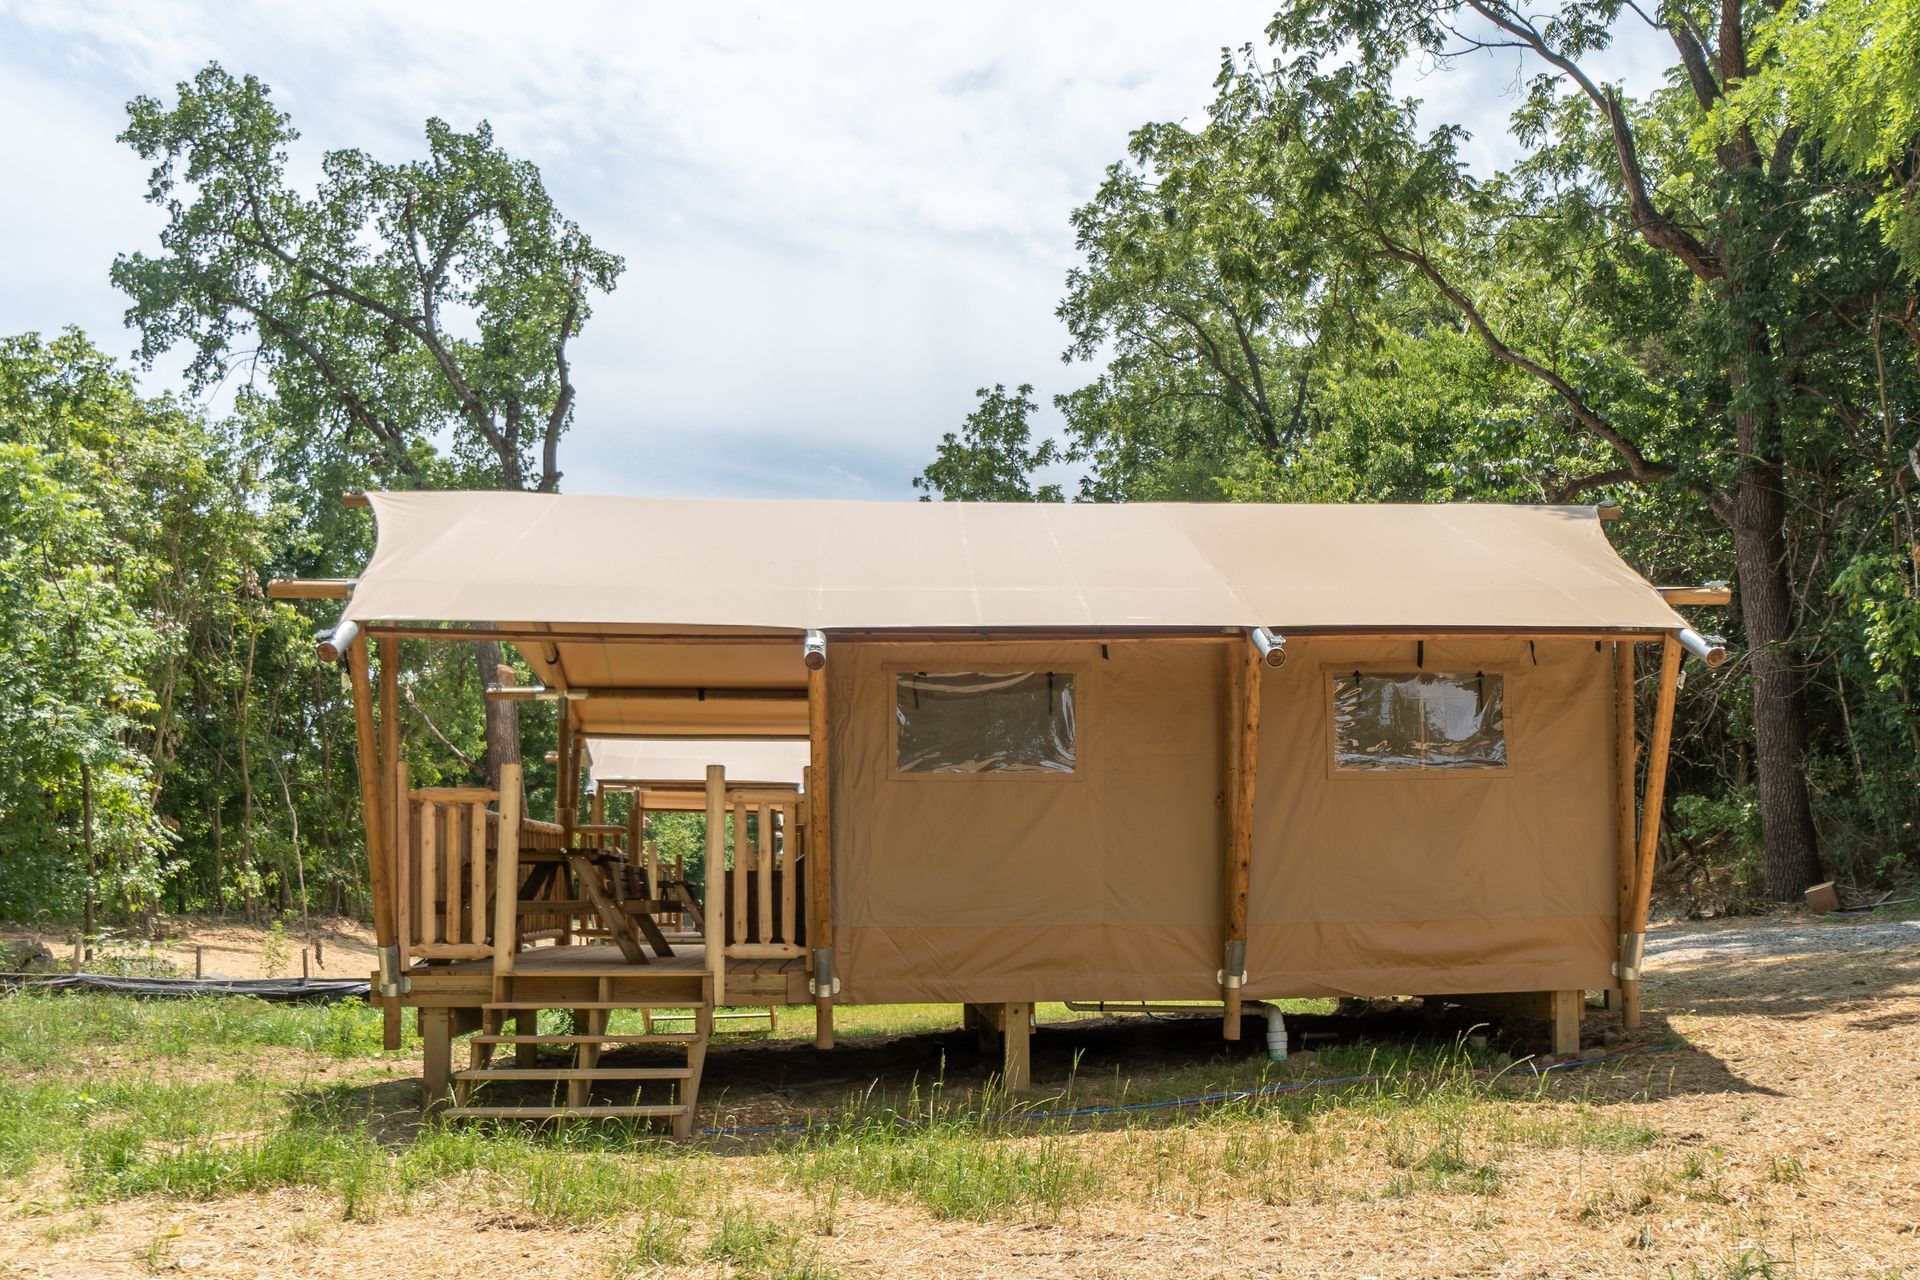 The glamping tents offer the perfect balance for a more adventurous yet luxurious experience.